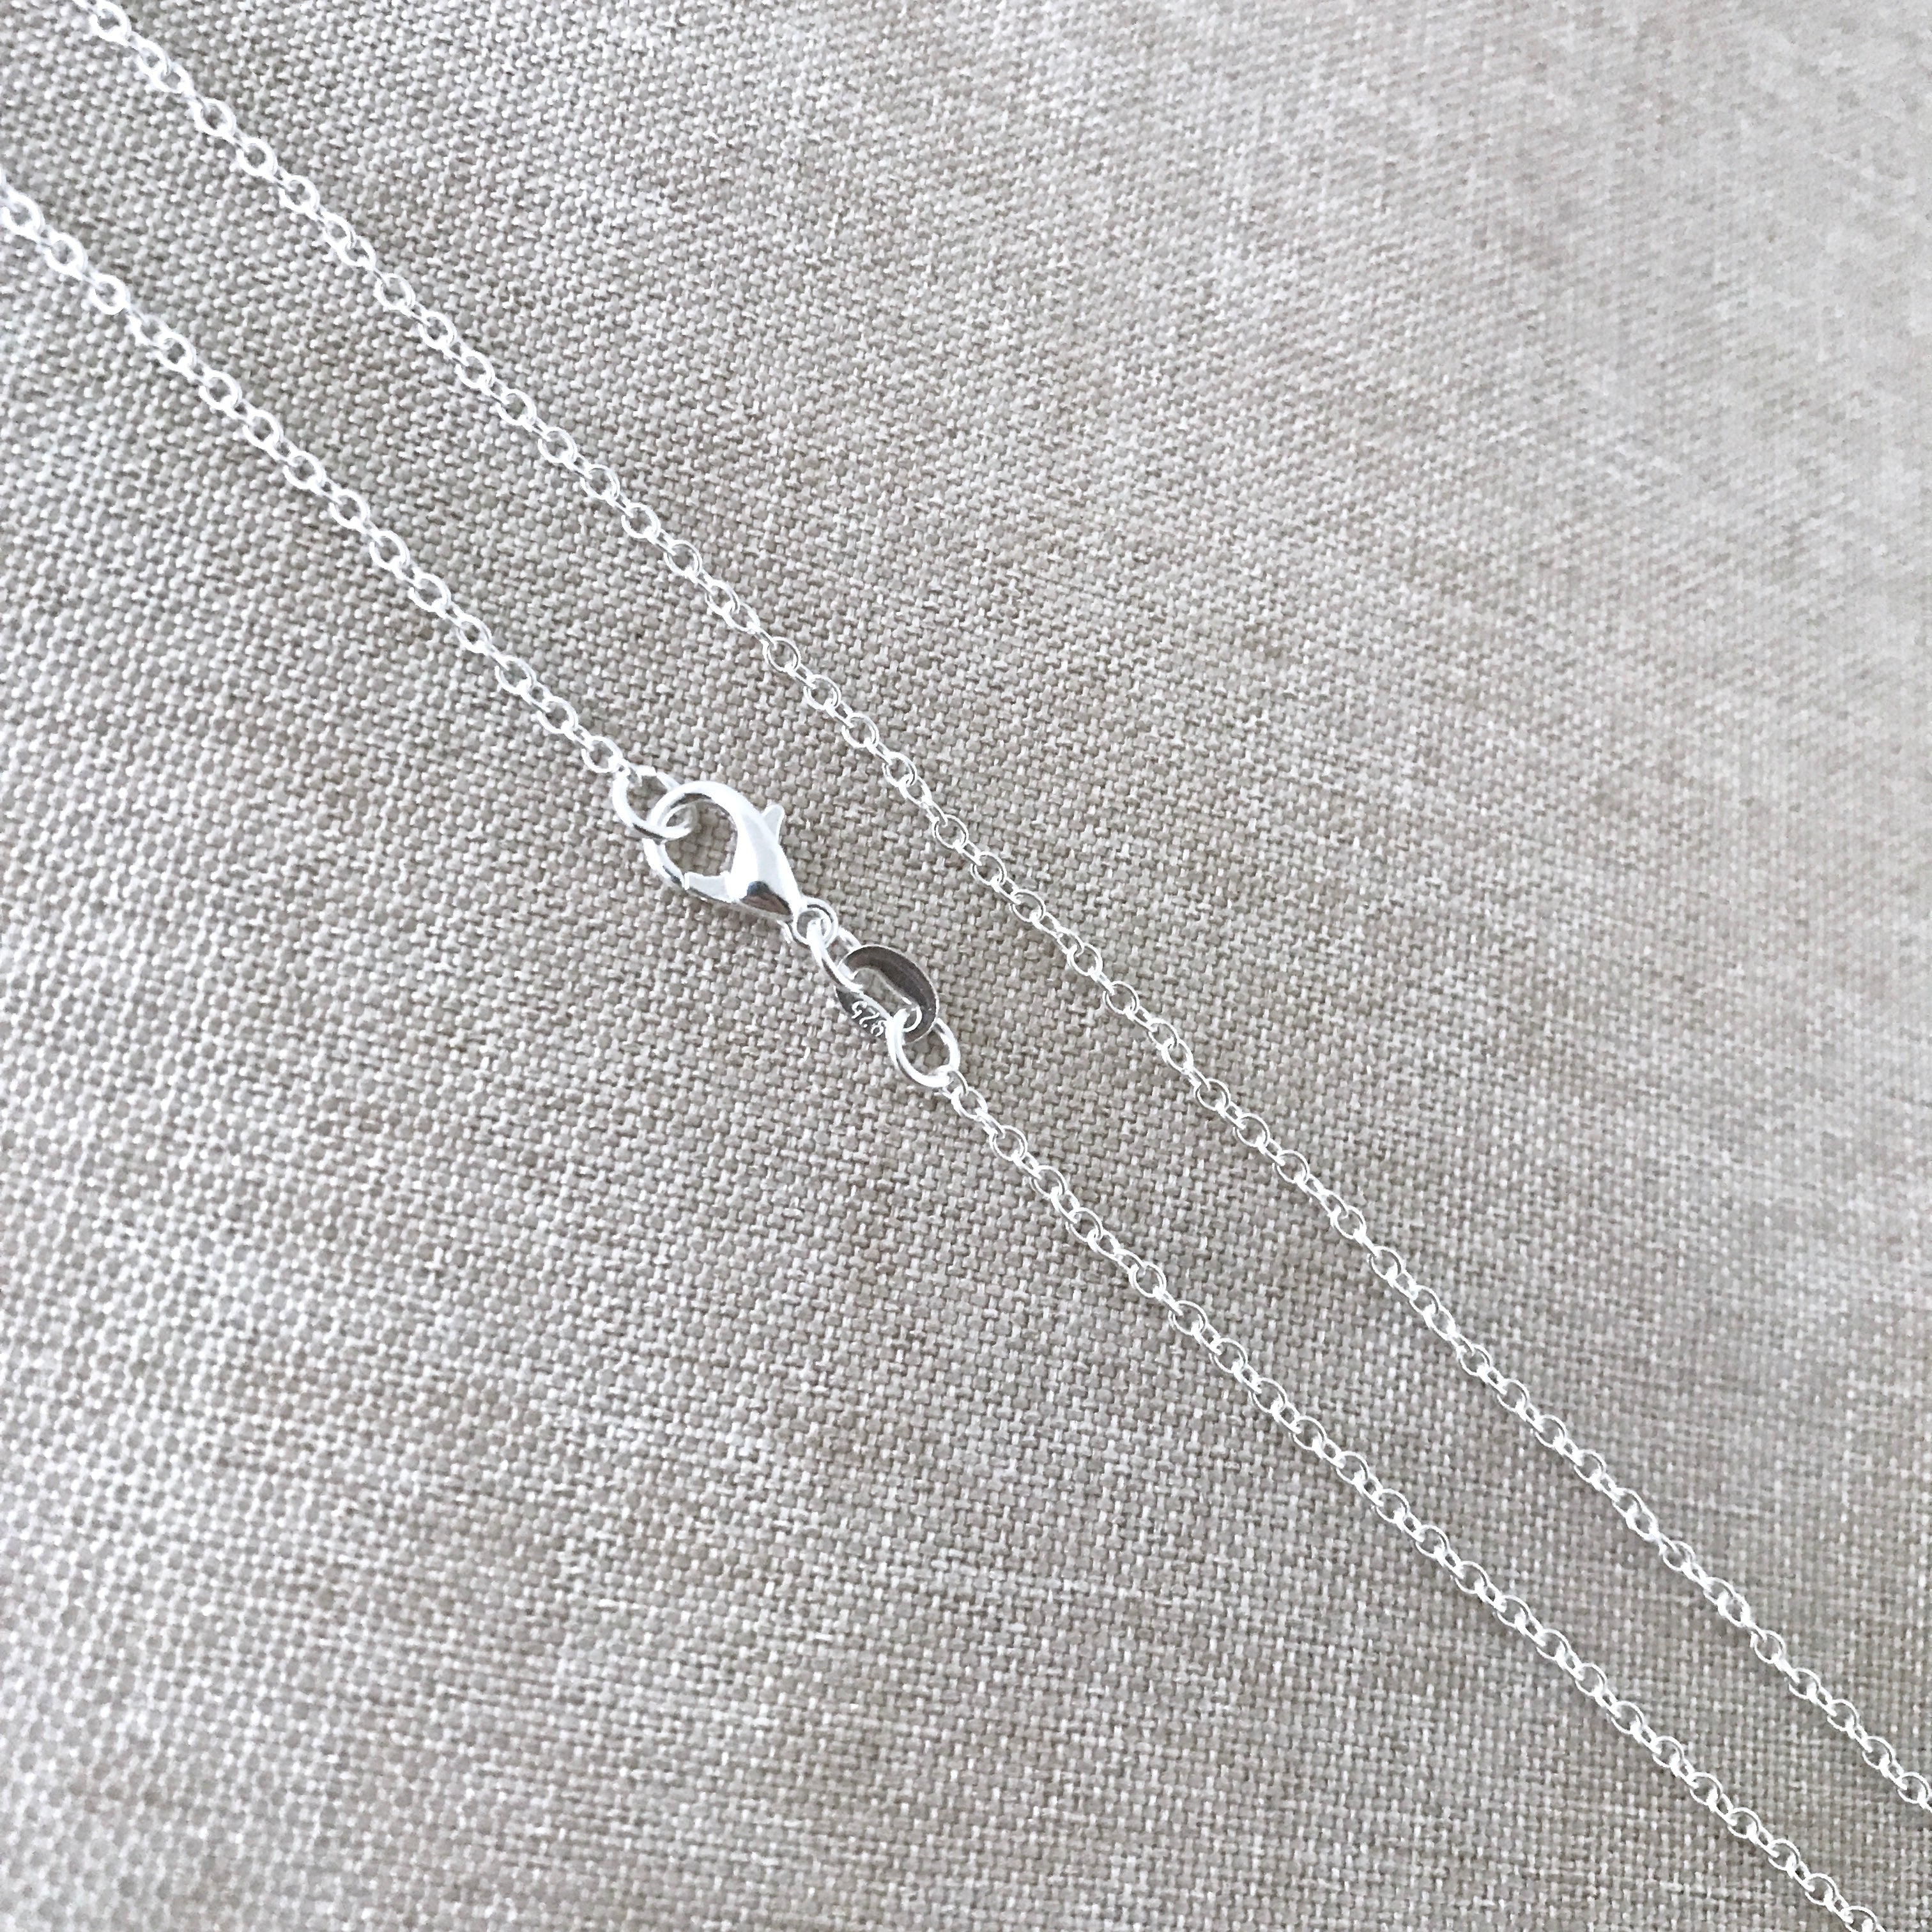 18 - 925 Sterling Silver Filled Necklace Chain - Dainty Fine - 18